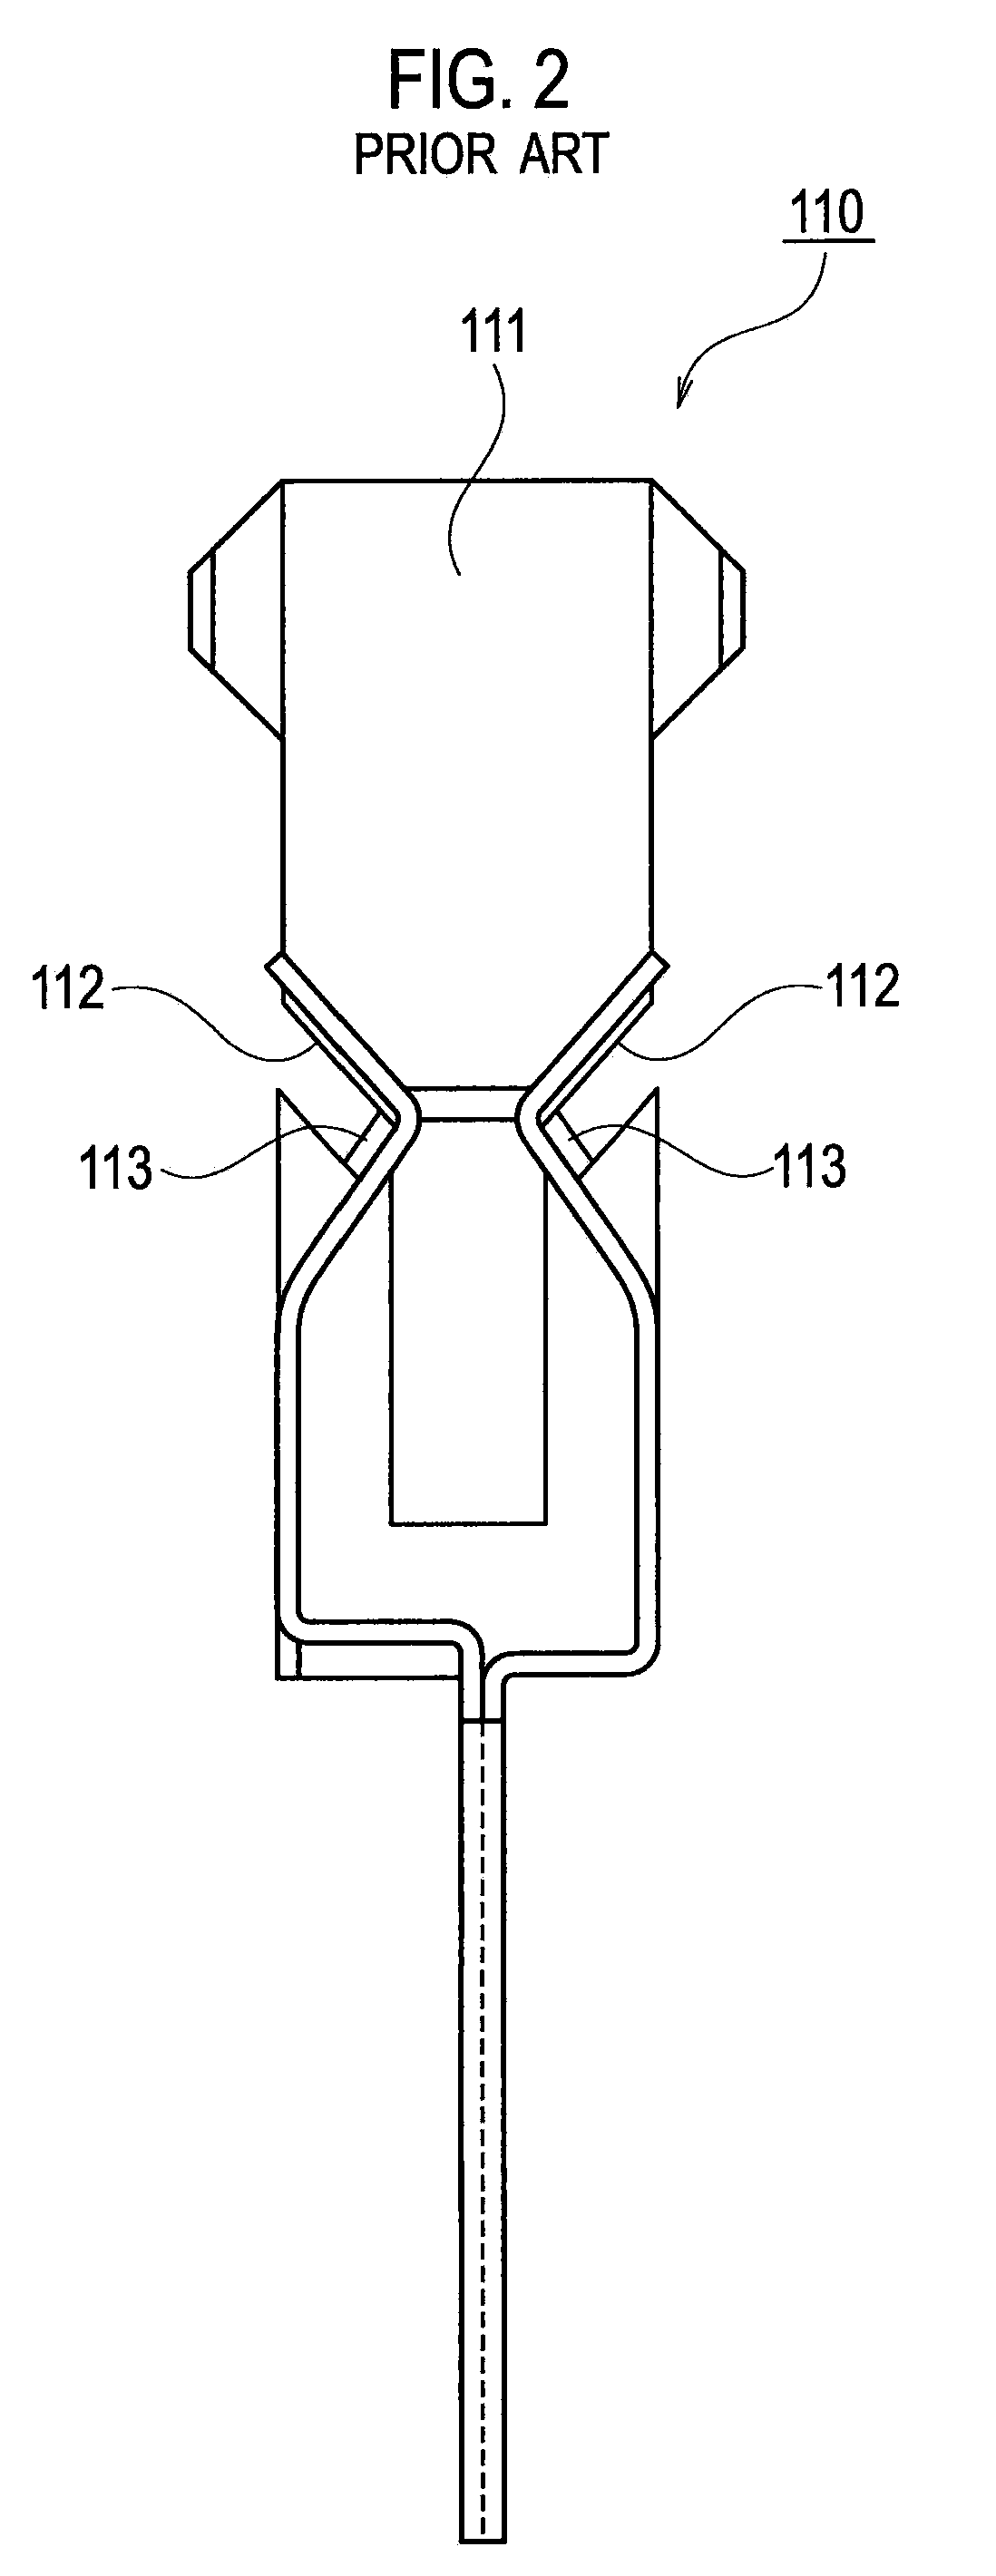 Bulb Socket Structure for Onboard Interior Lighting System